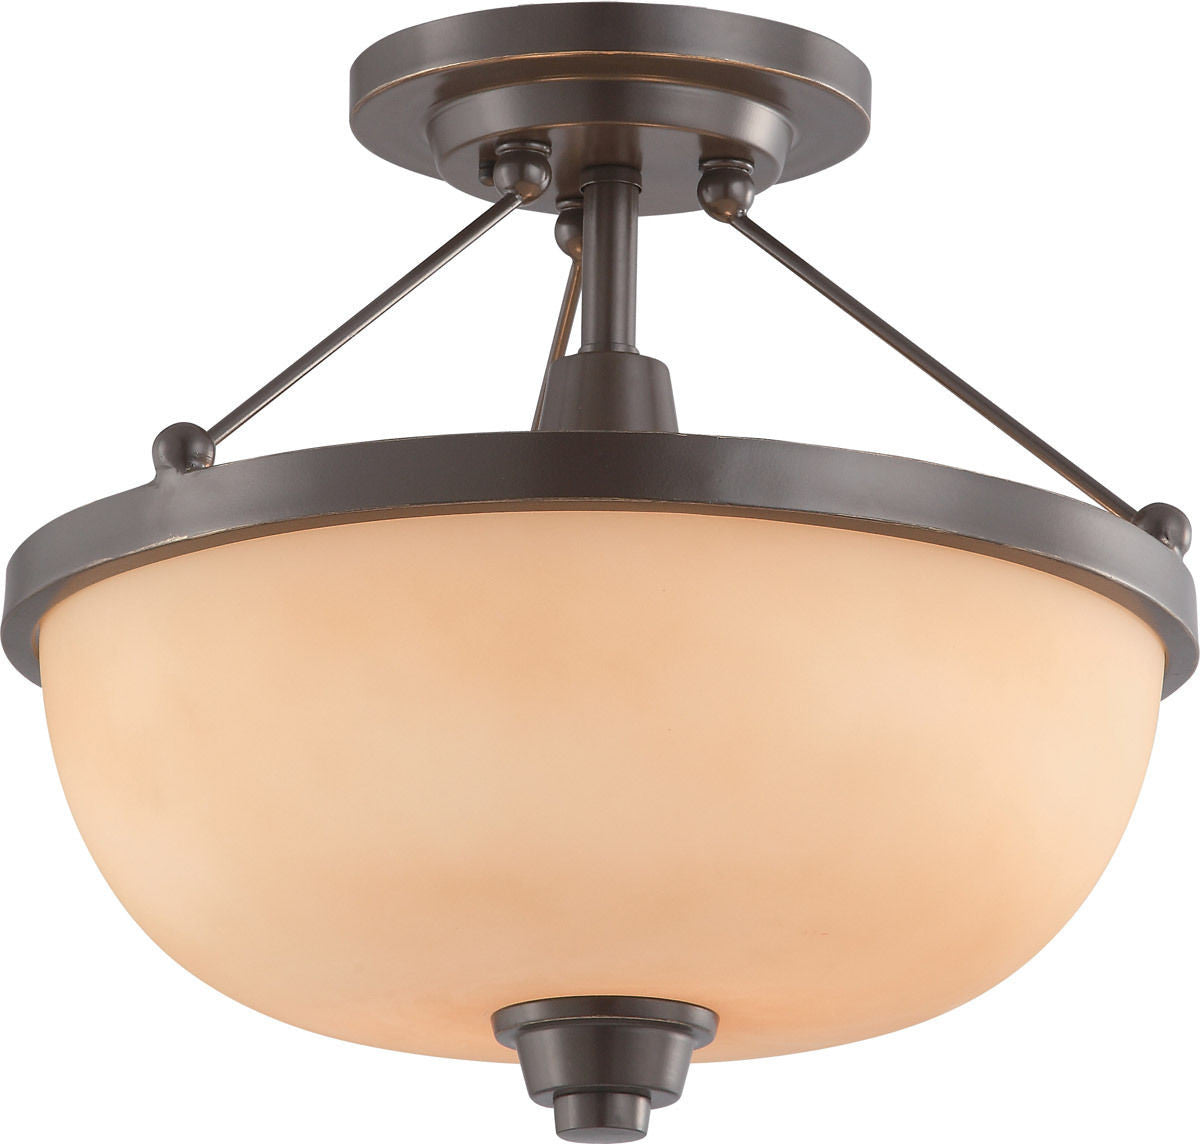 Nuvo Lighting 60-4208 Helium Collection Two Light Semi Flush Ceiling Mount in Vintage Bronze Finish